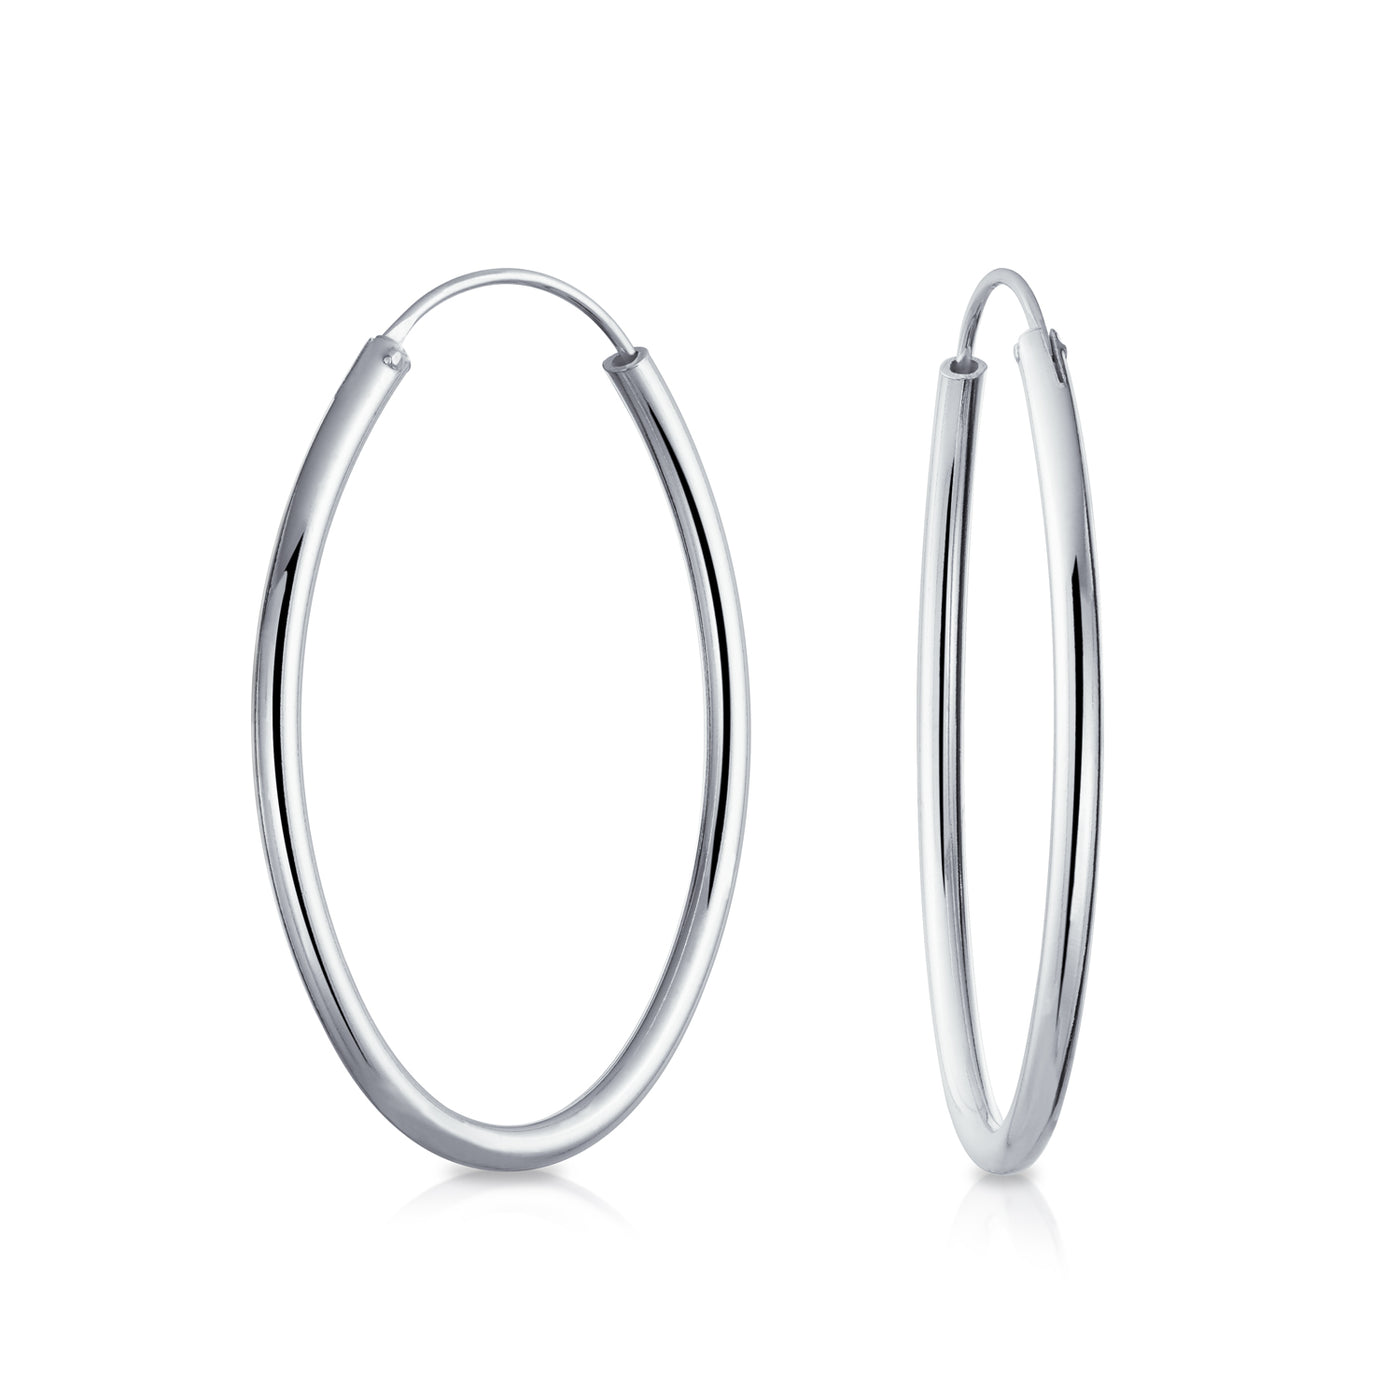 Minimalist Round Endless Continuous Tube Hoop Earrings Sterling Silver